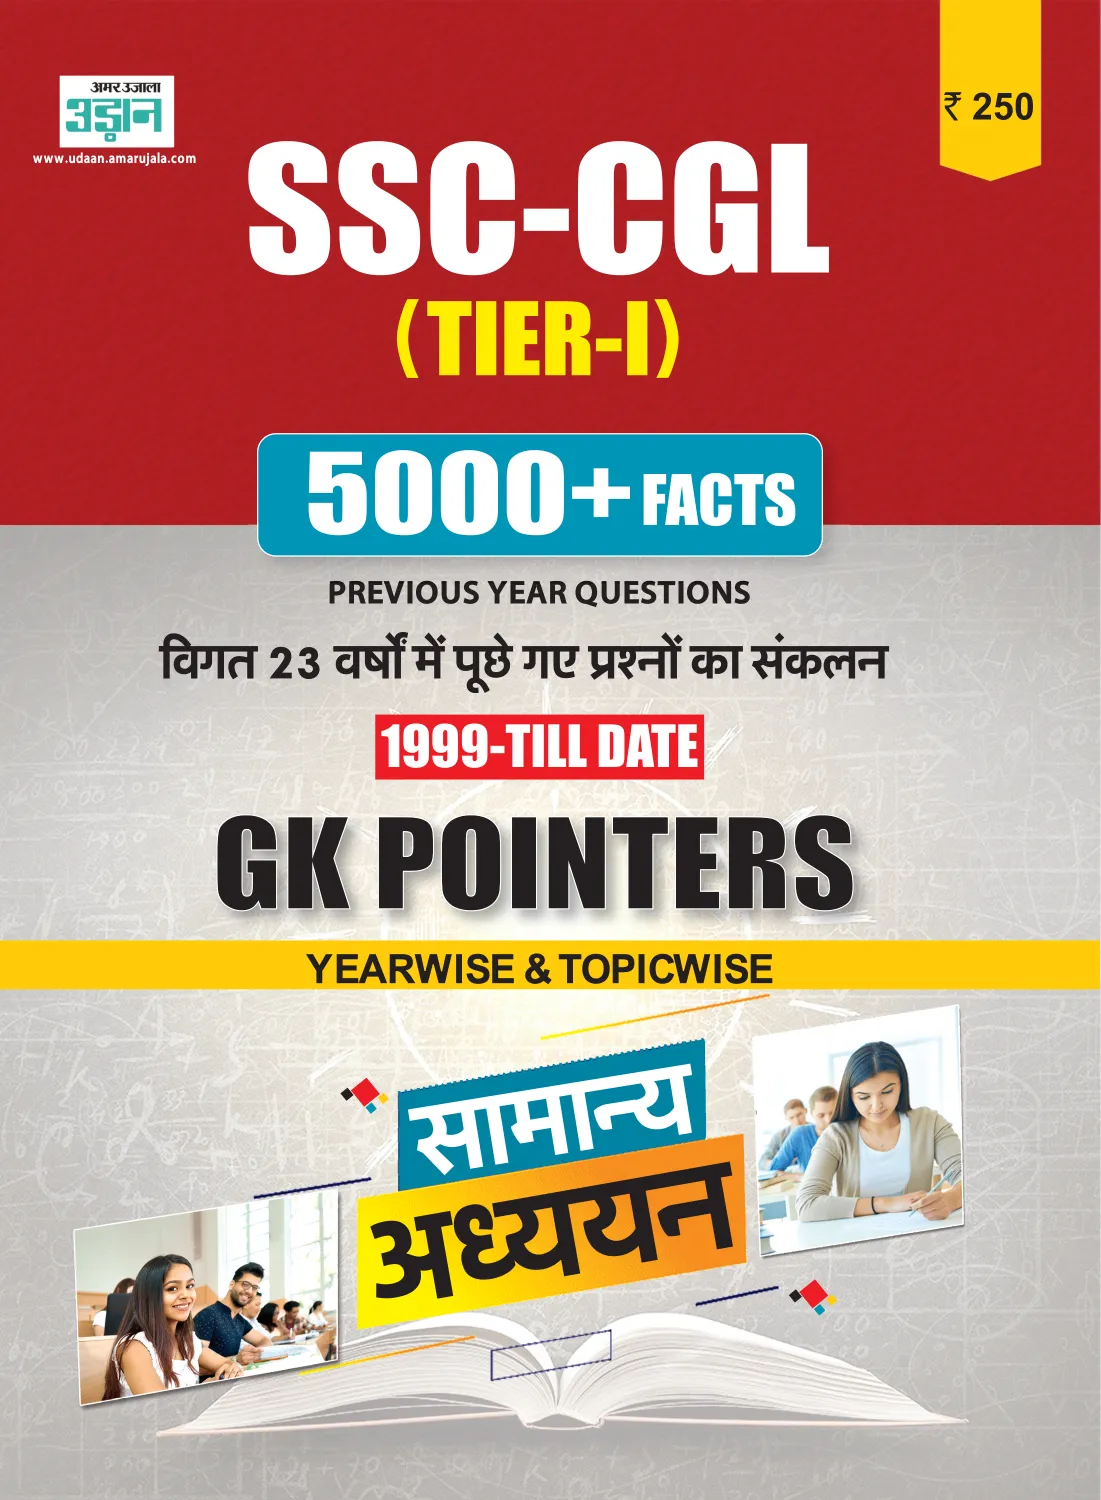 SSC -CGL COVER